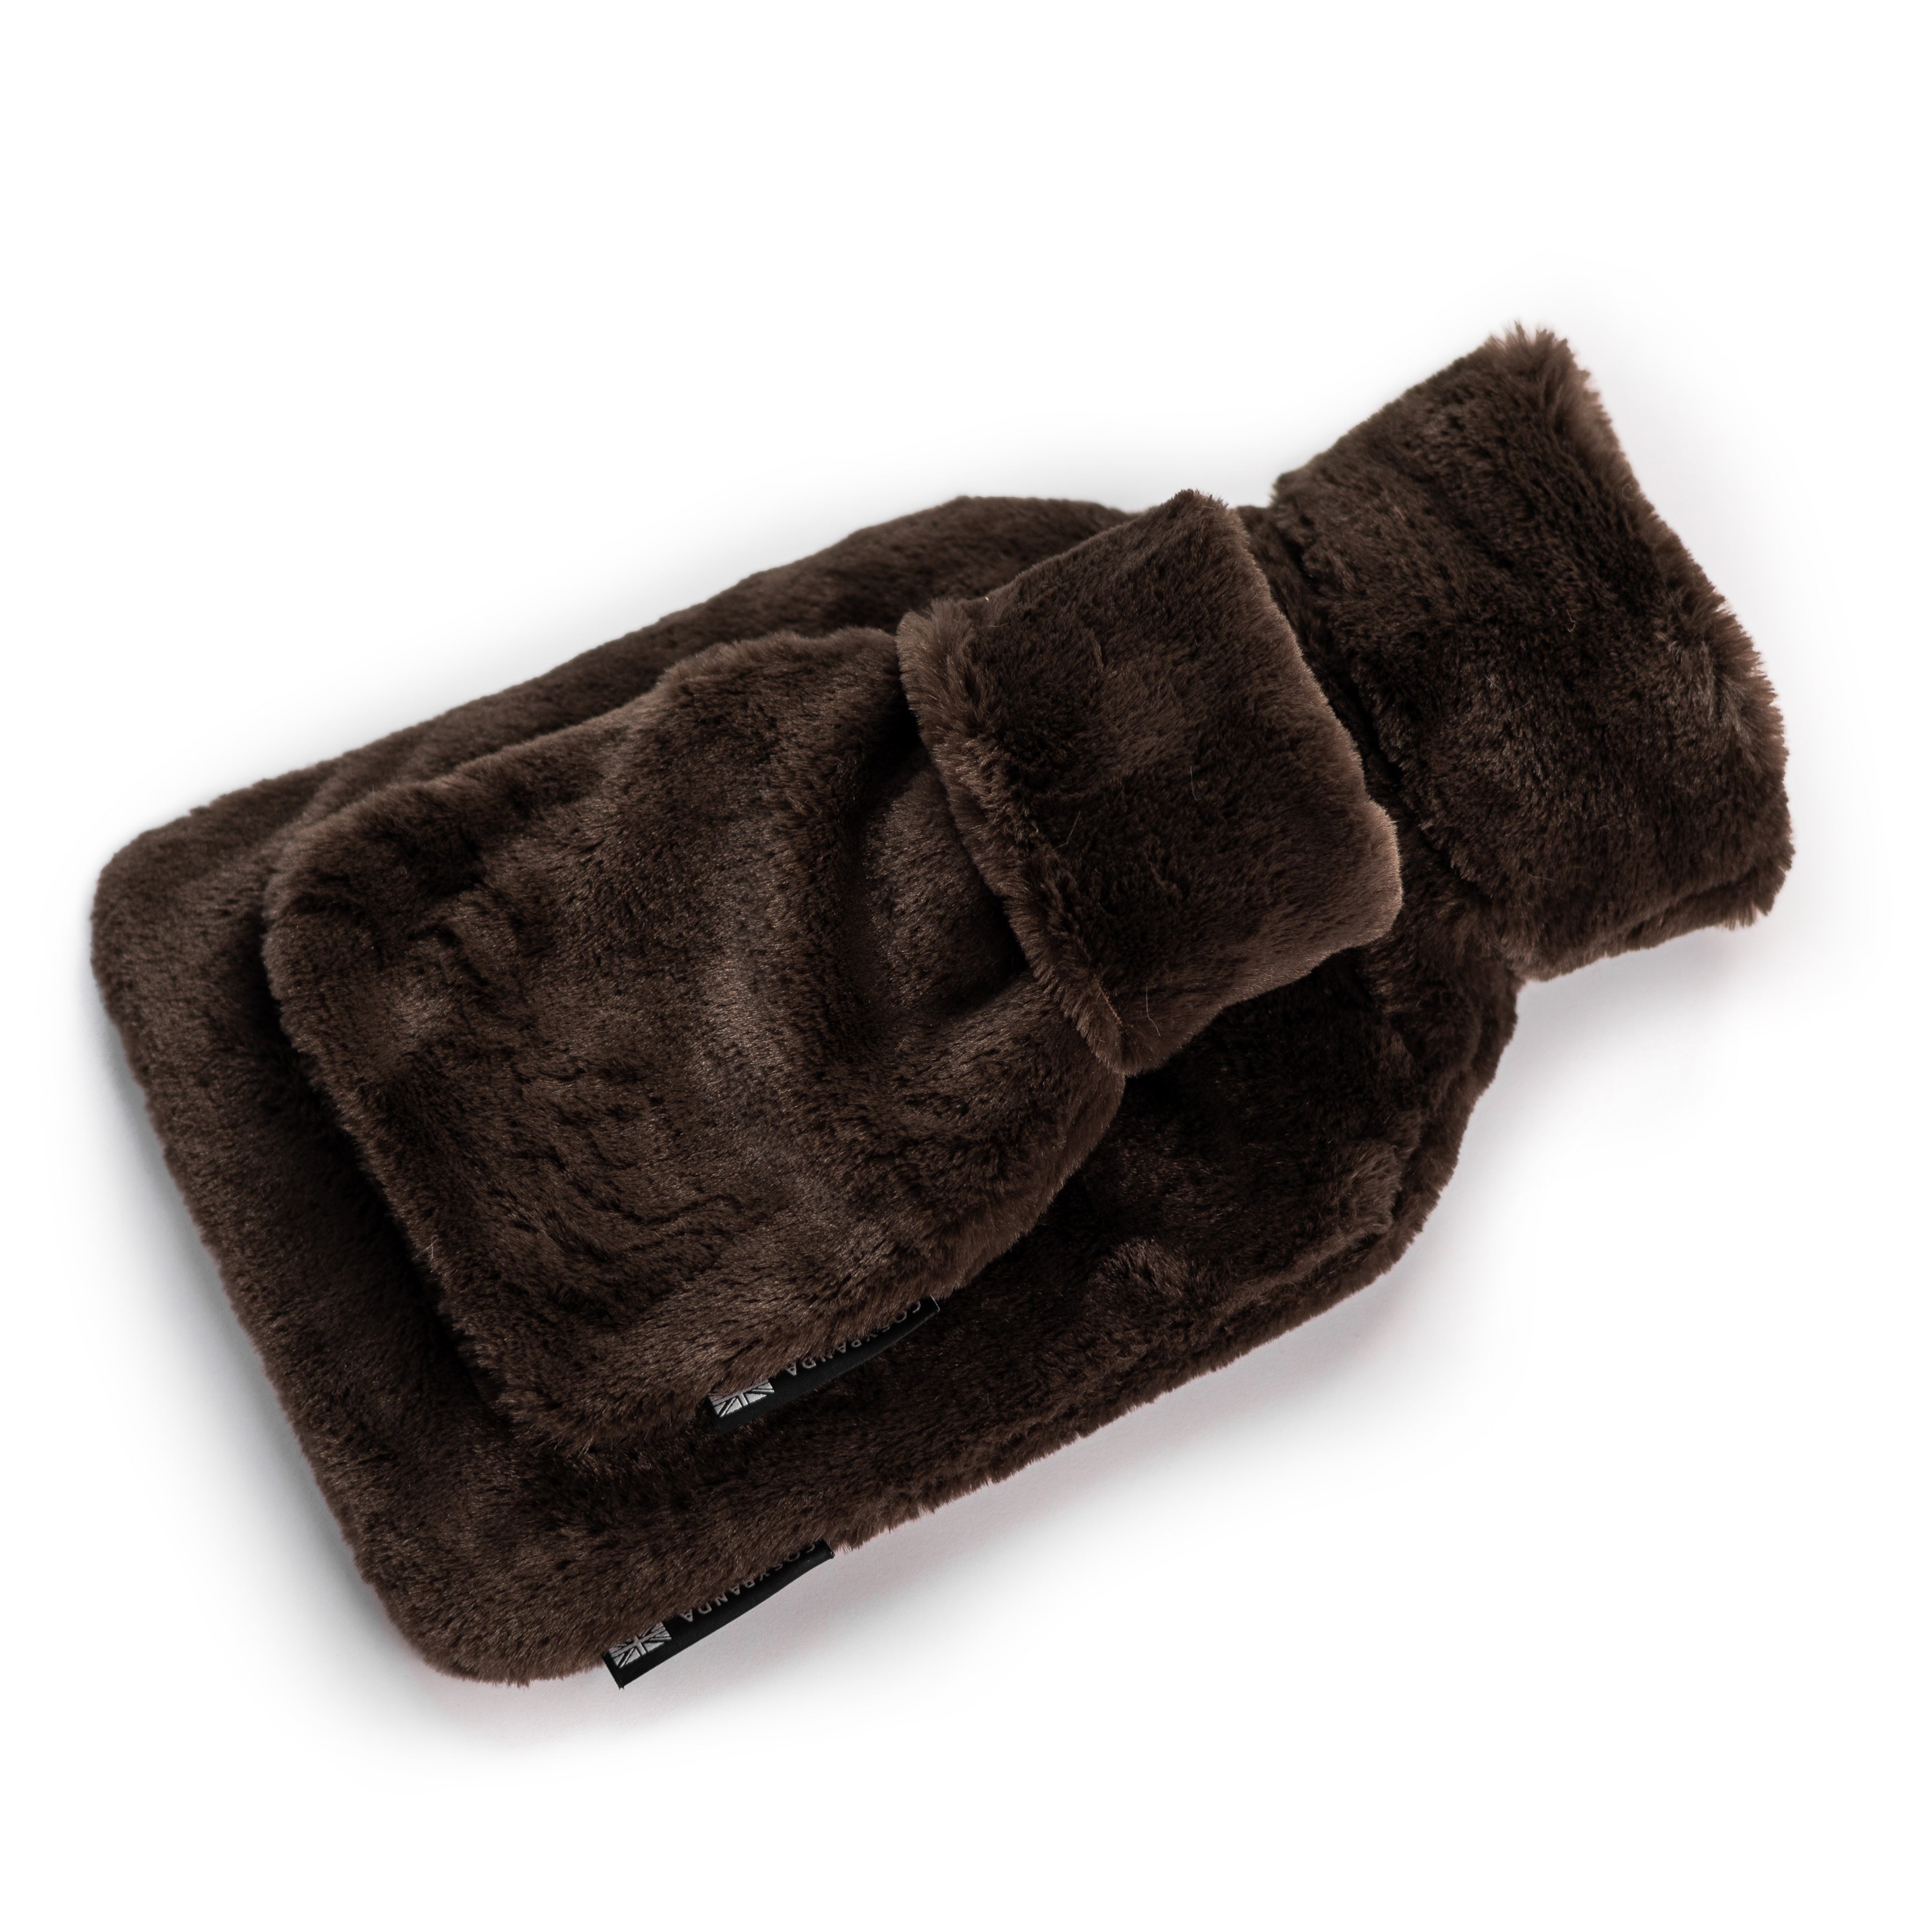 Little and Large Chocolate Faux Fur Hot Water Bottle Gift Set